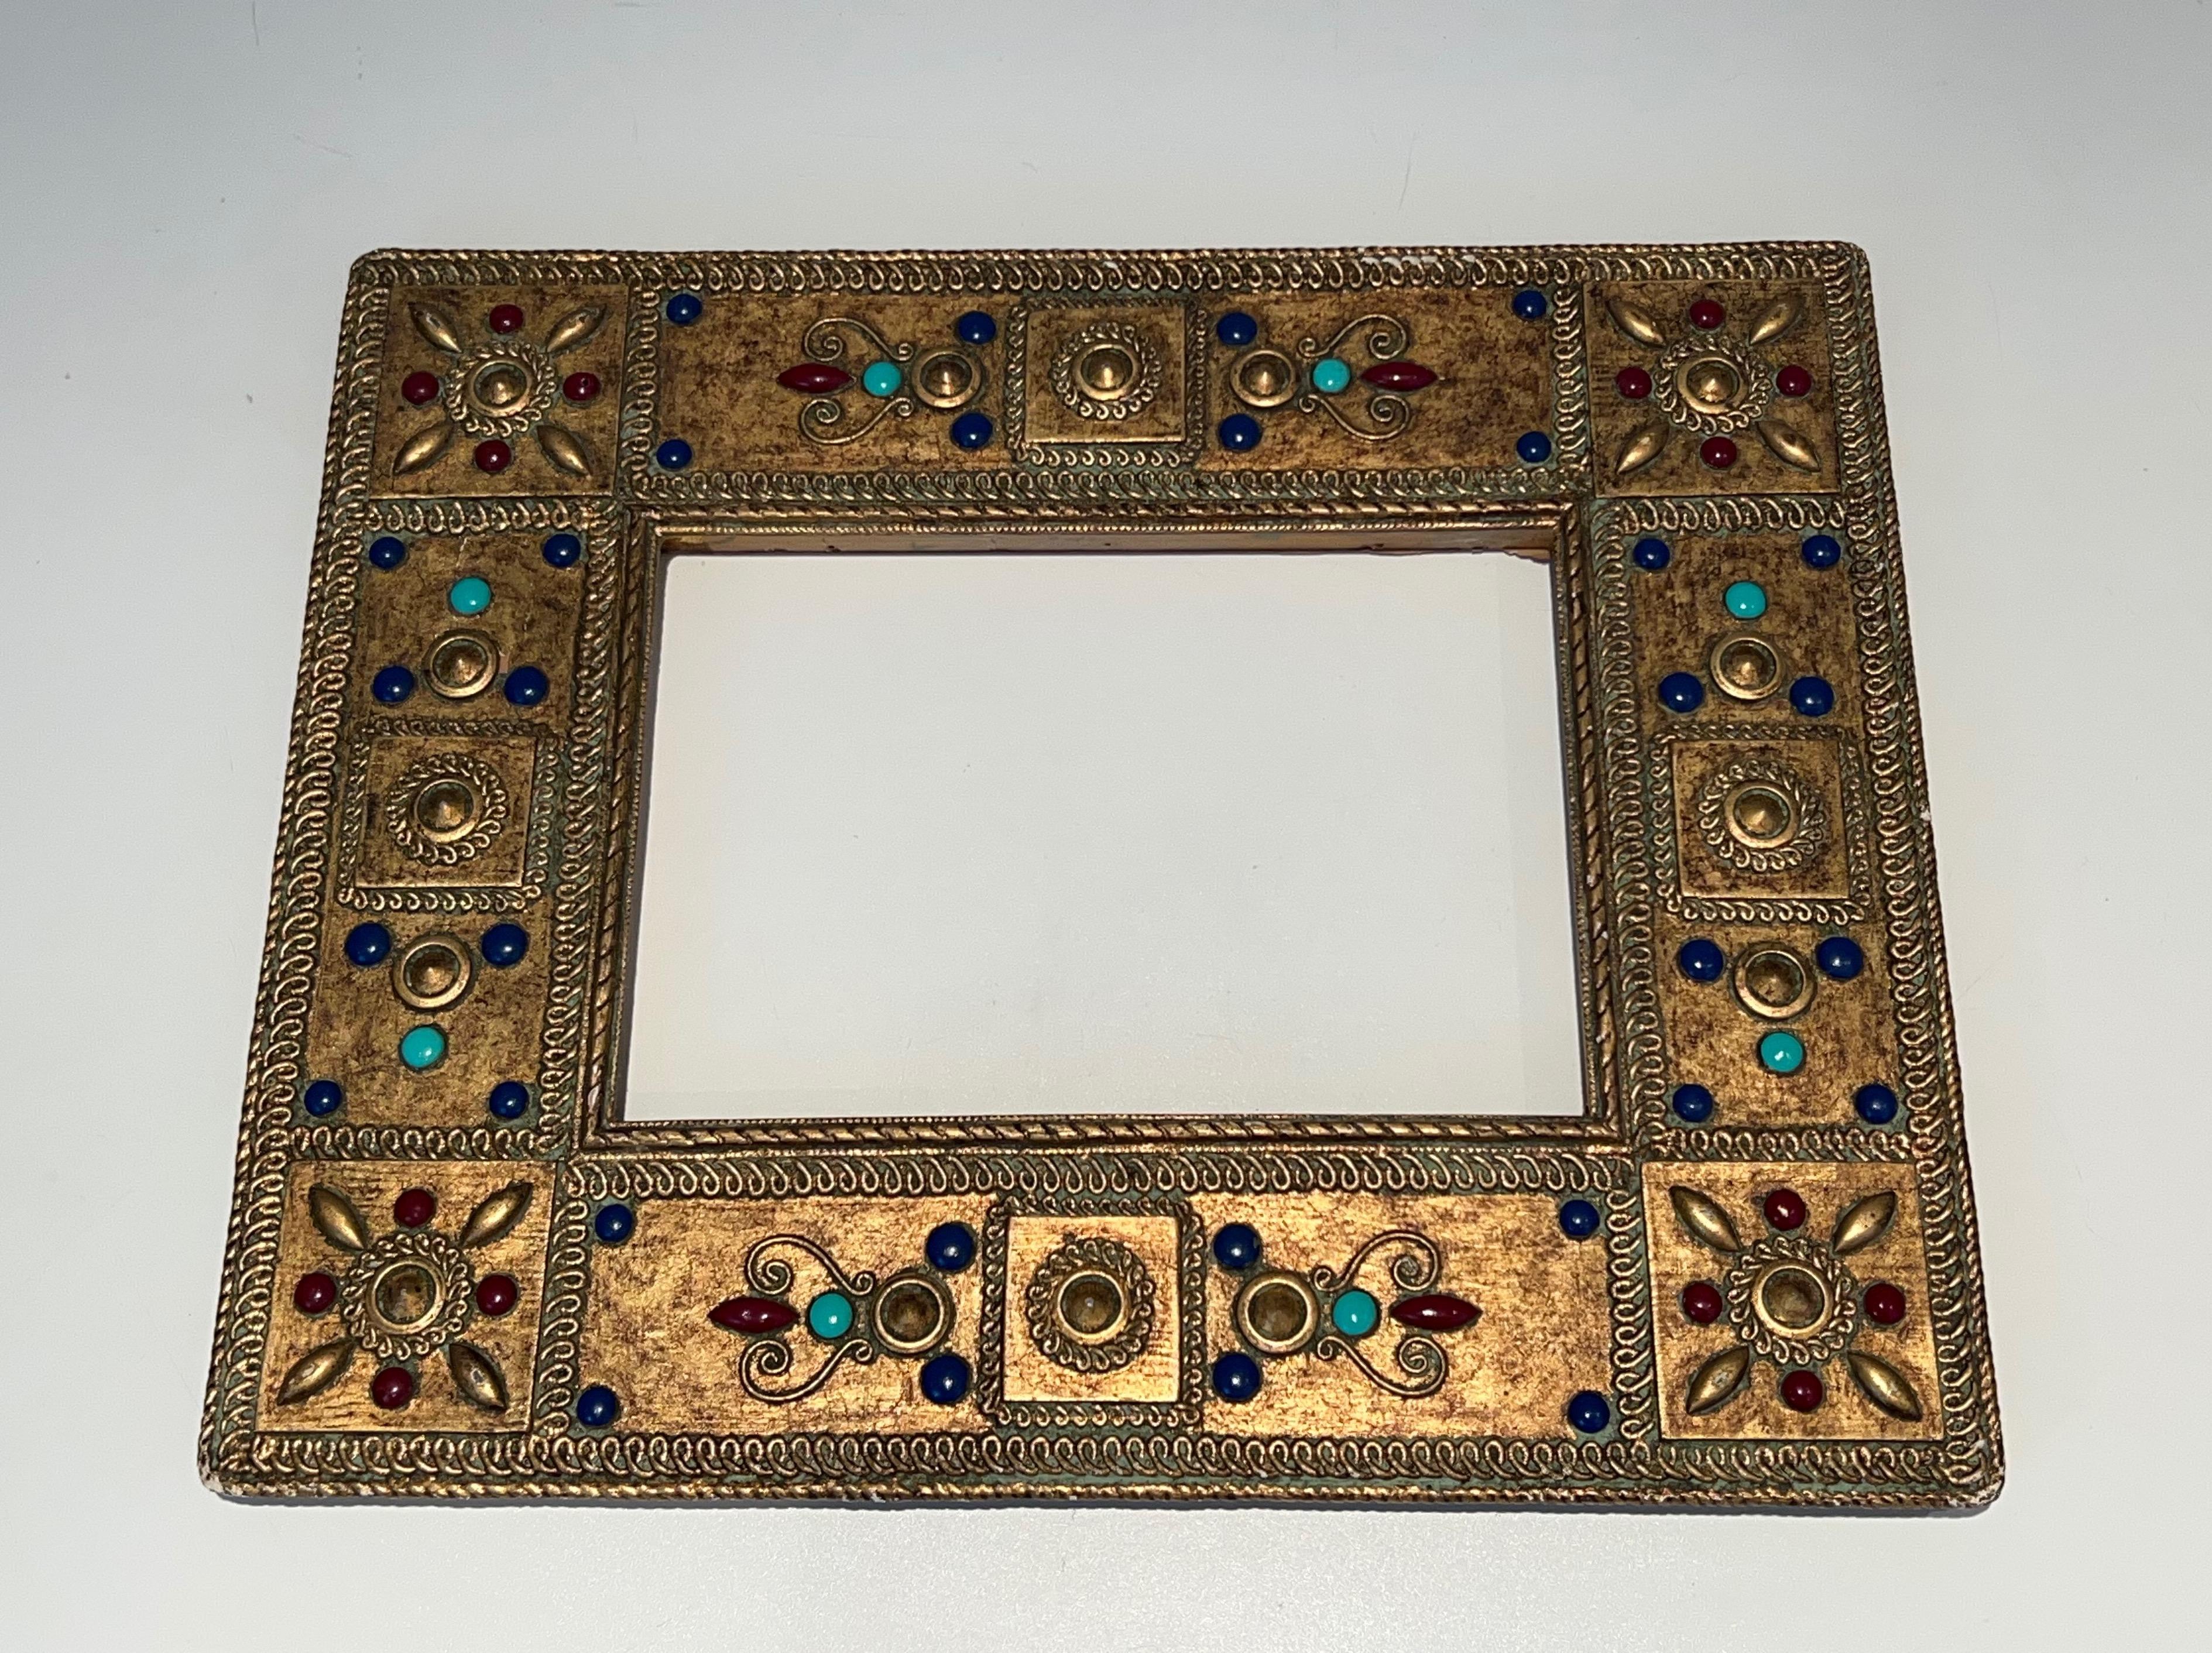 Mid-Century Modern Small Wooden Frame with Fine Stones Incrustations. French Work. Circa 1970 For Sale